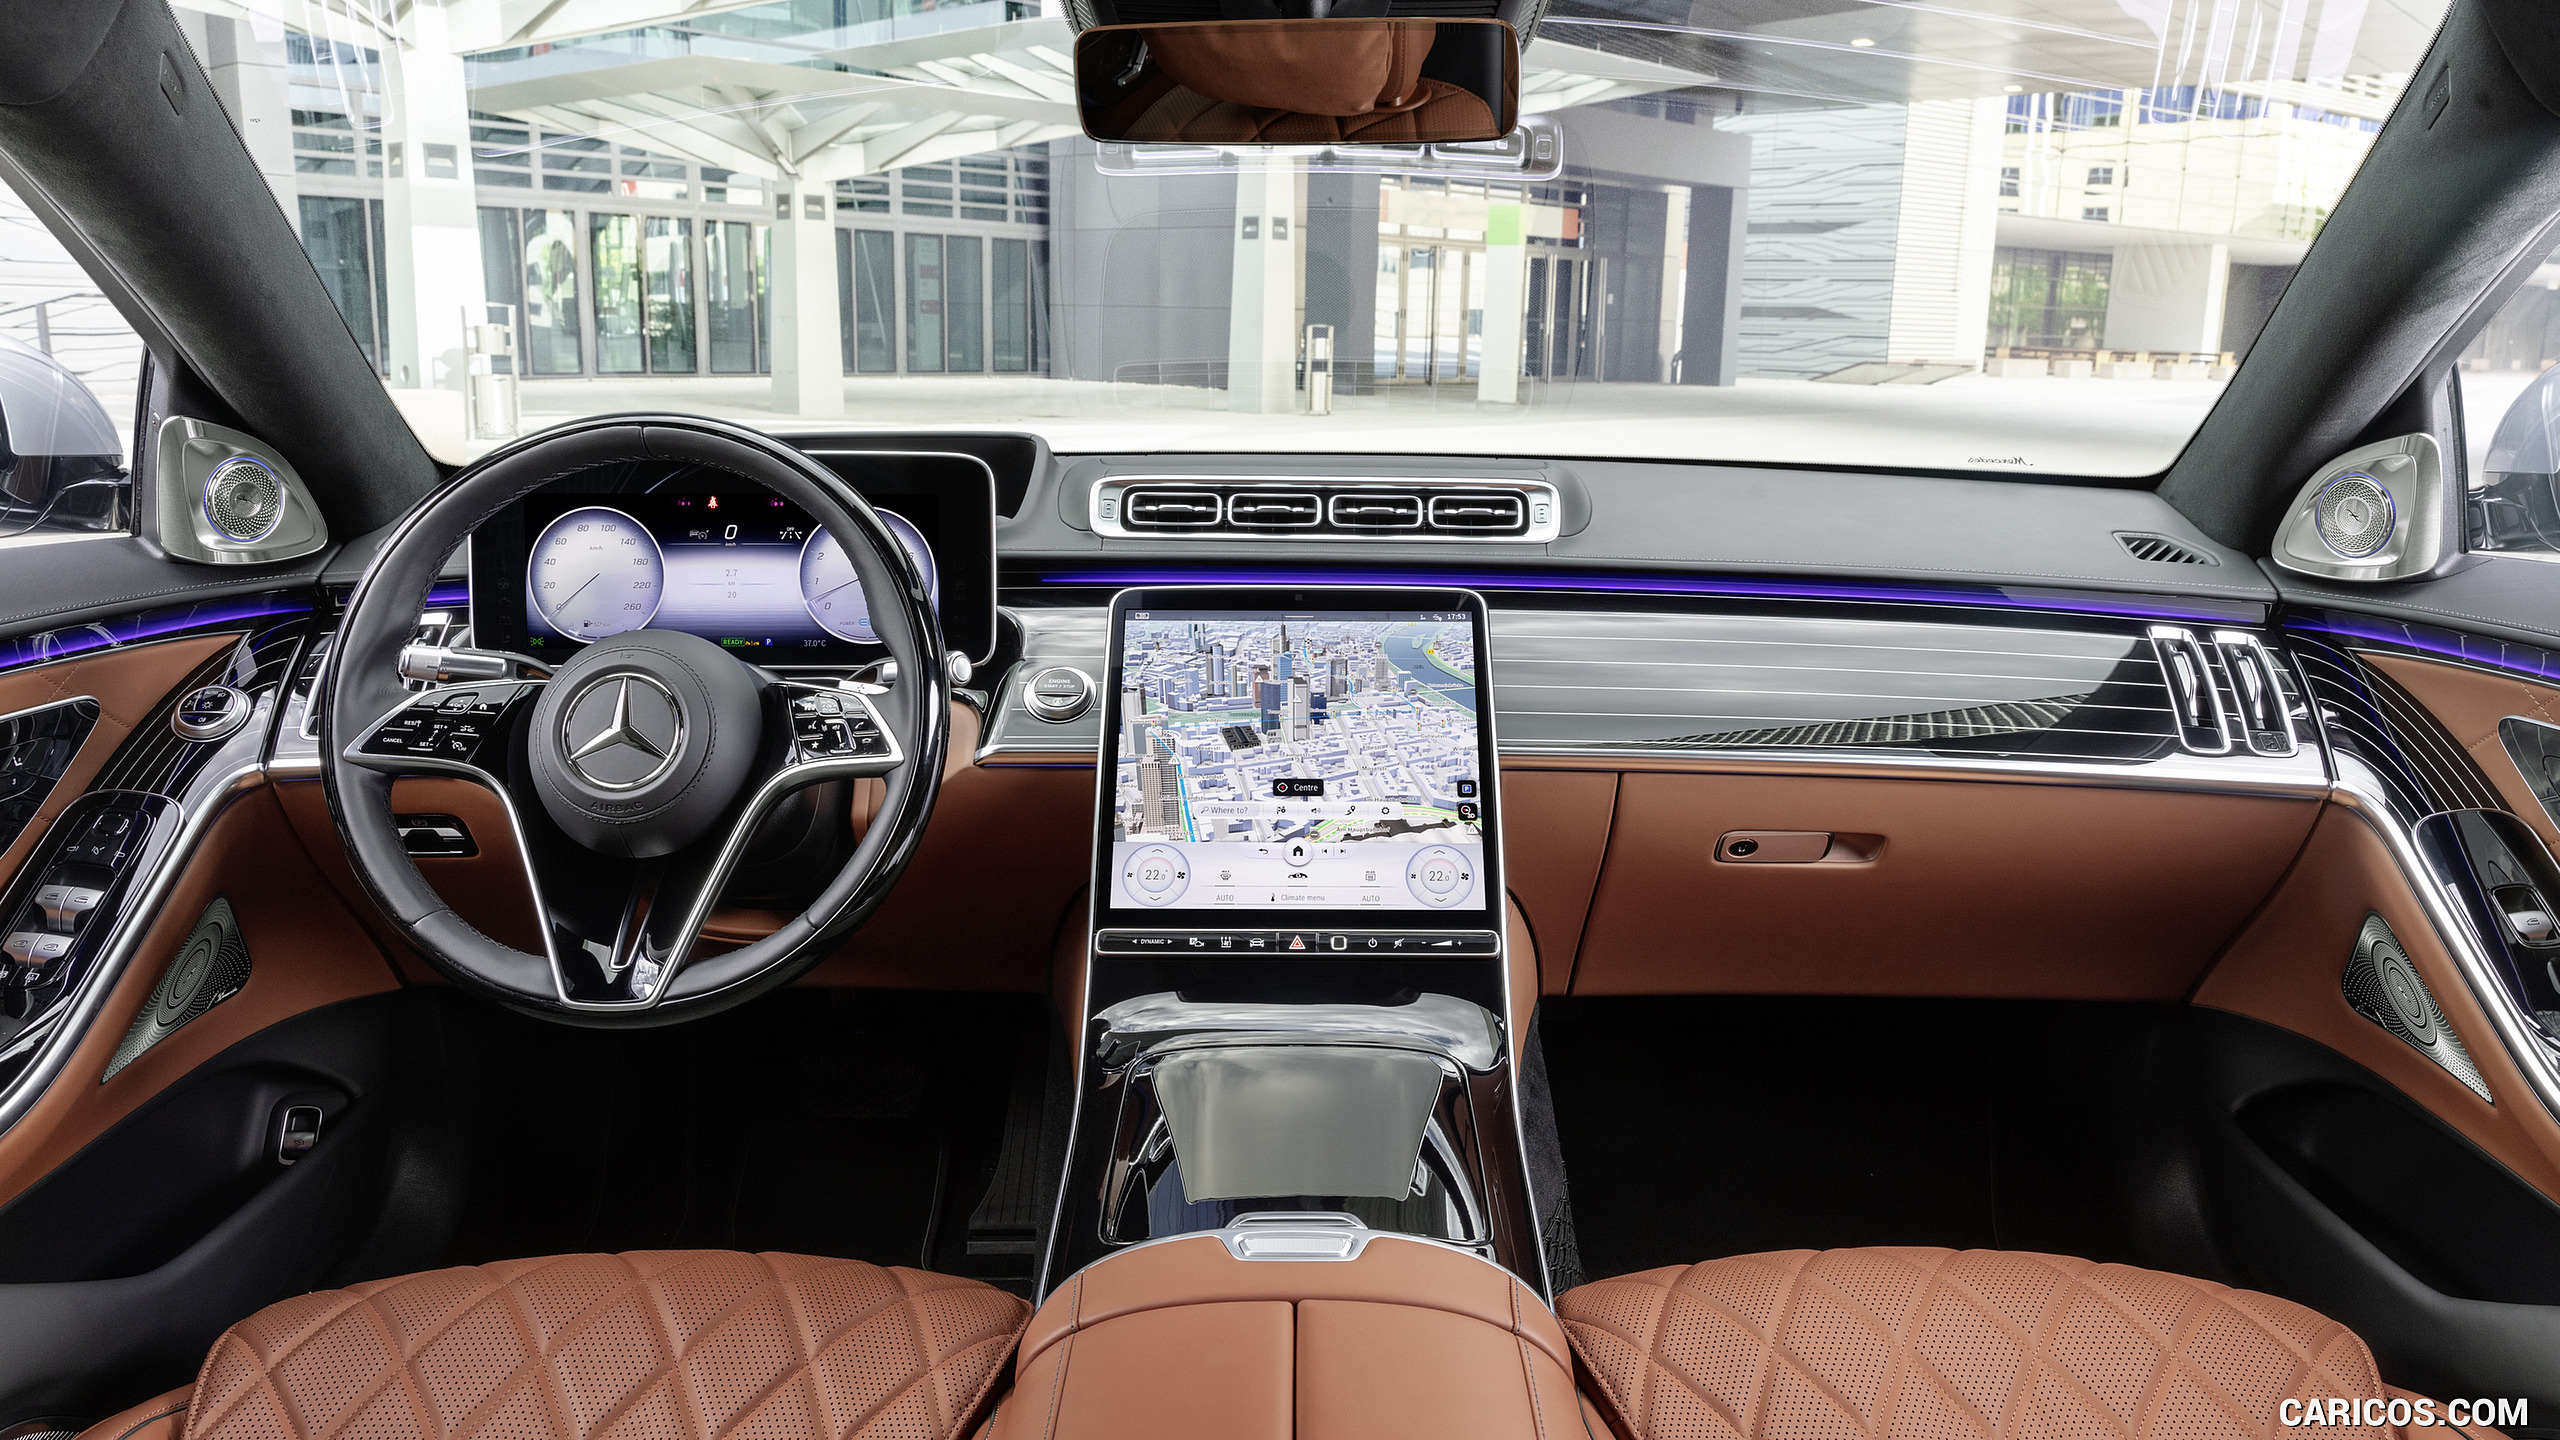 2021 Mercedes-Benz S-Class (Color: Leather Siena Brown) - Interior, Cockpit, #106 of 316